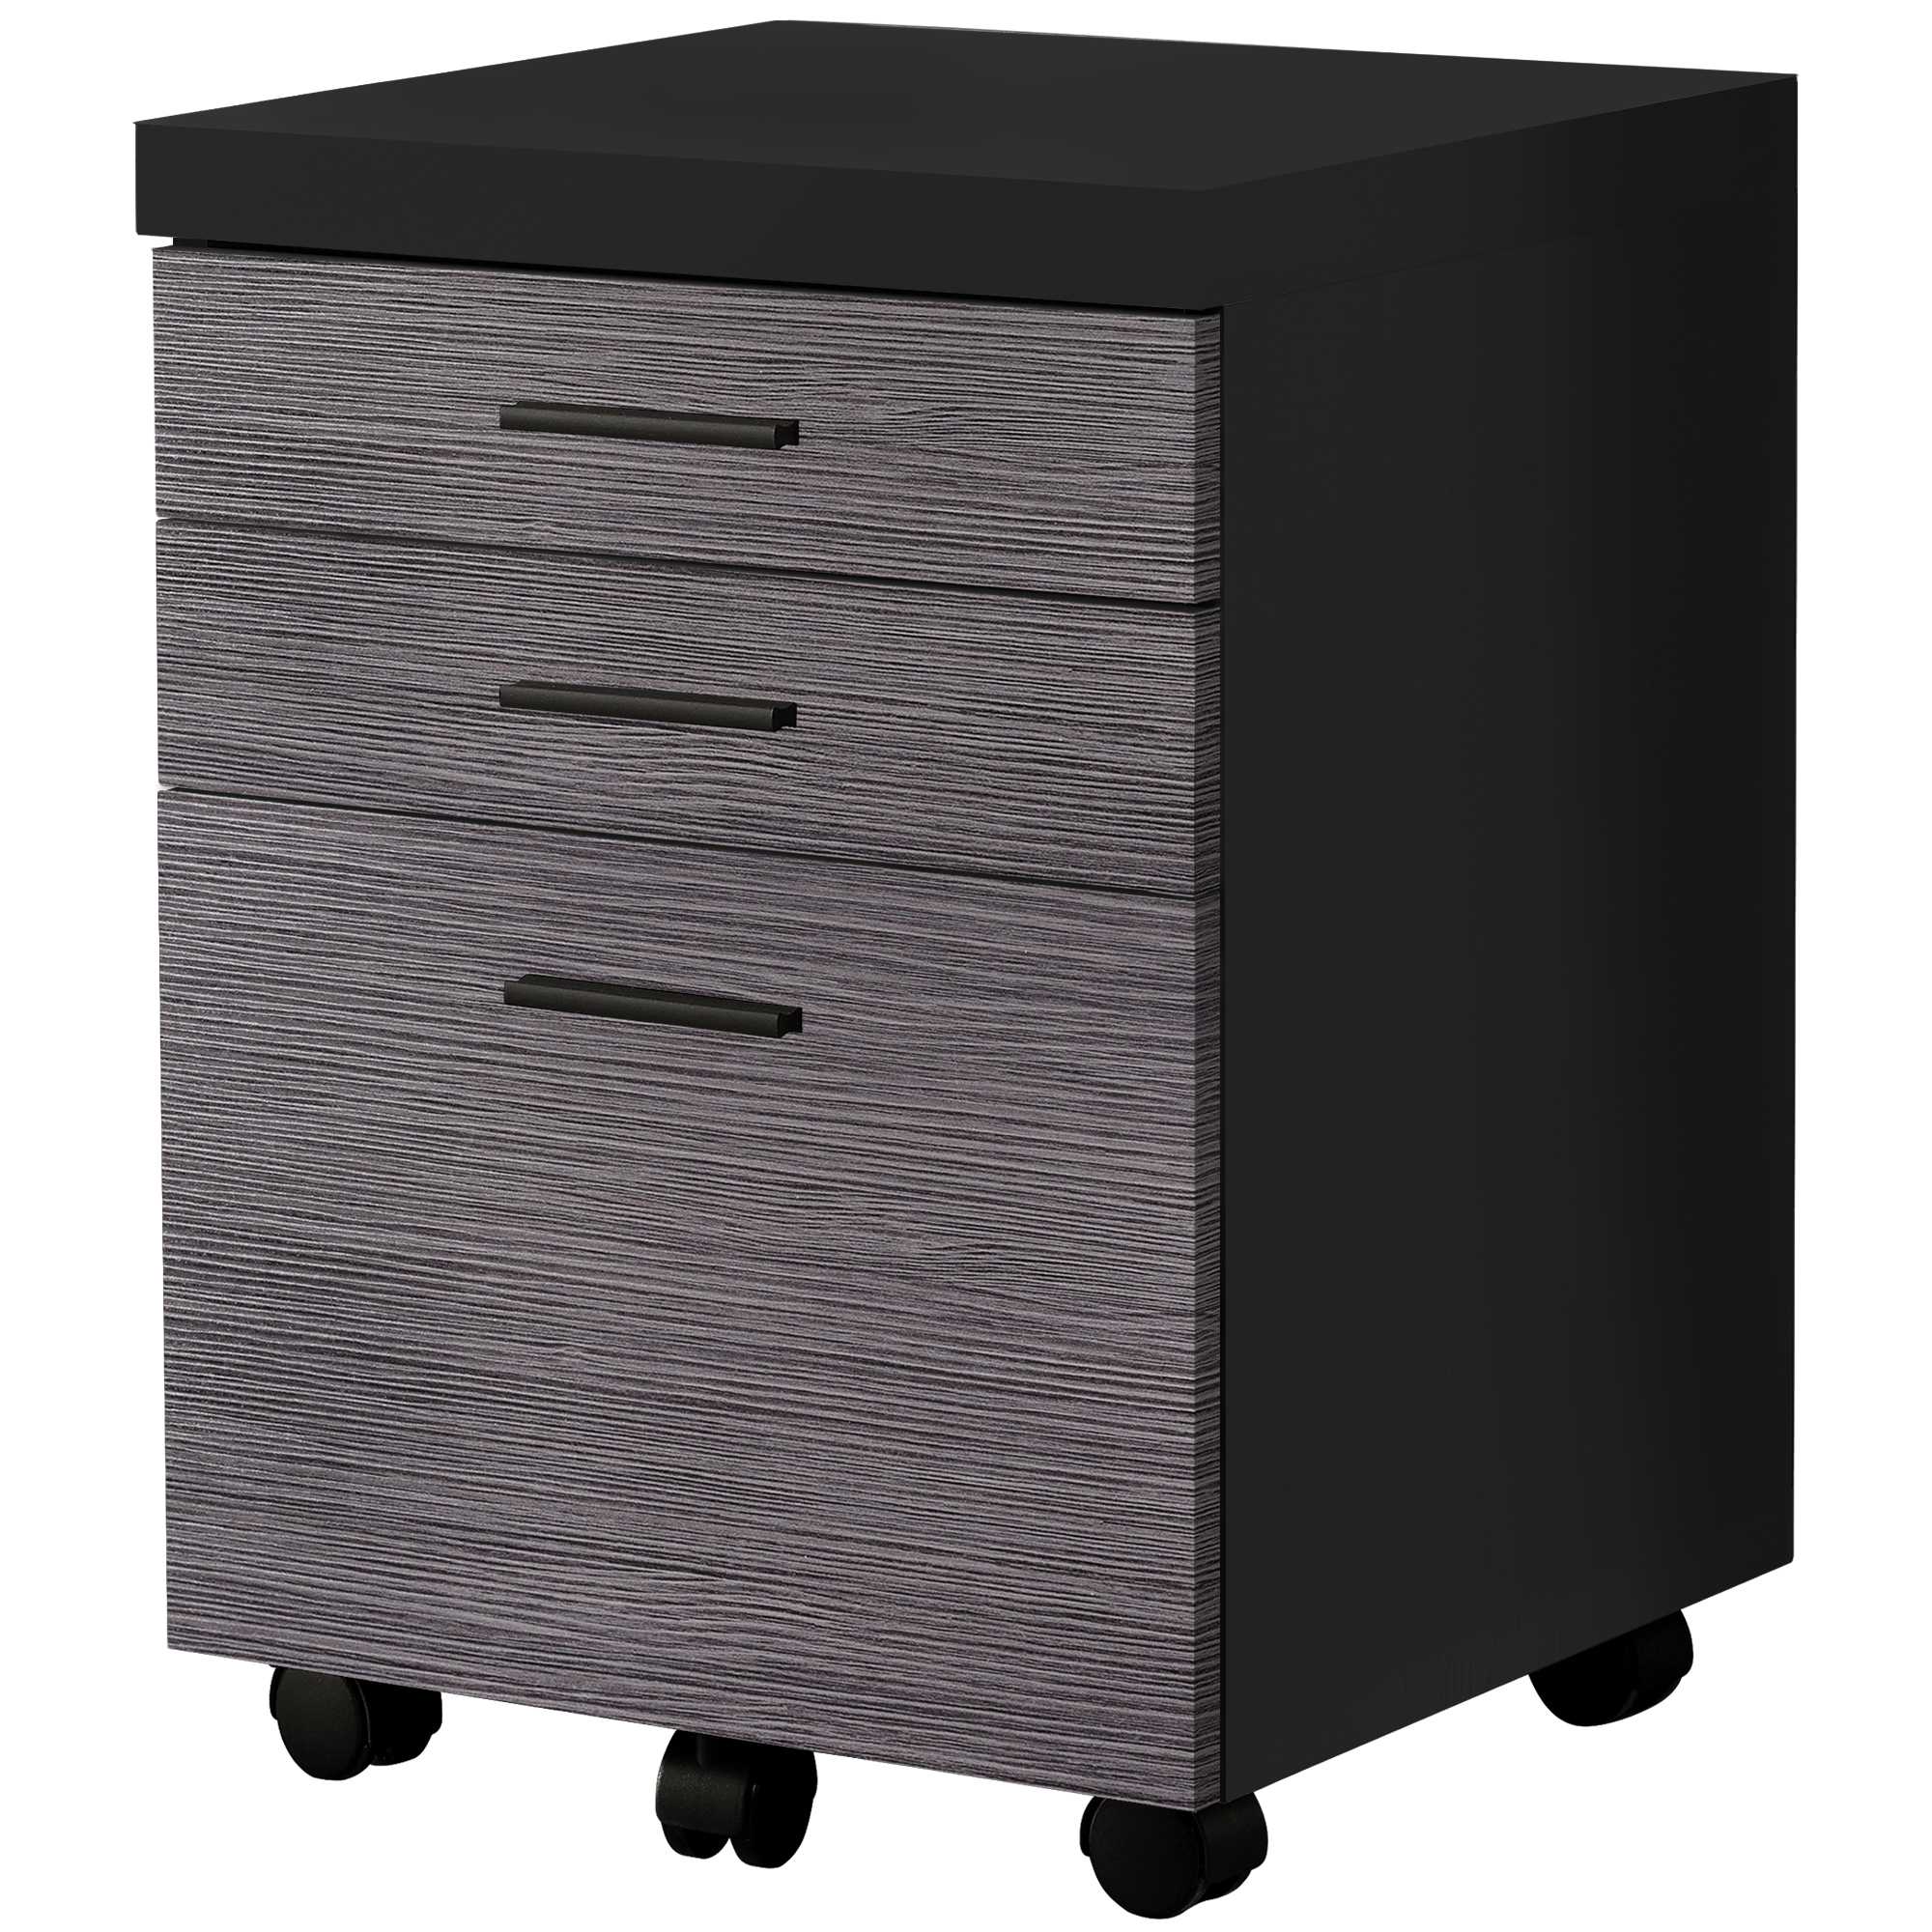 25.25" Particle Board And Mdf Filing Cabinet With 3 Drawers